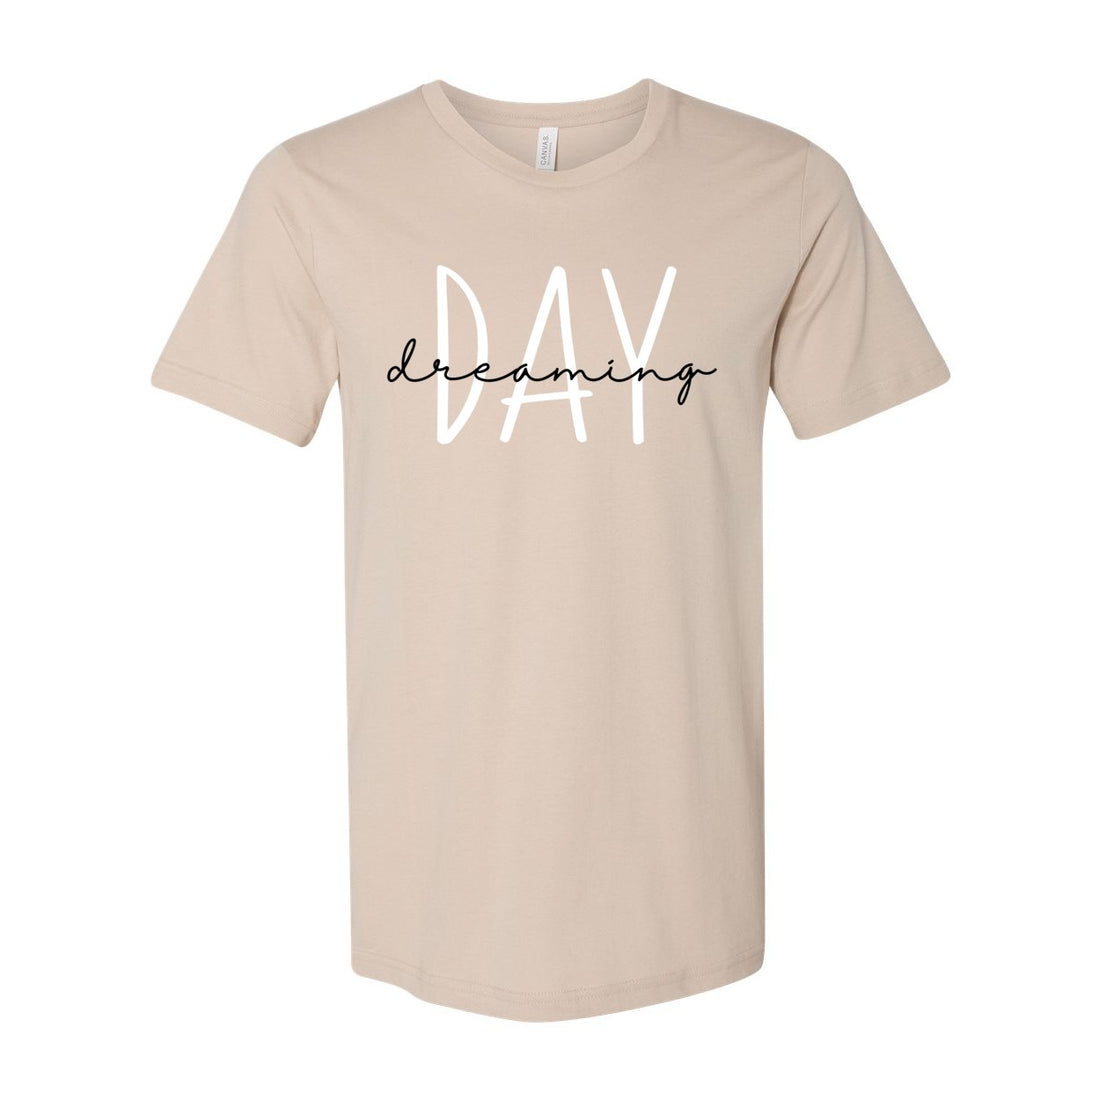 Day Dreaming Short Sleeve Jersey Tee - T-Shirts - Positively Sassy - Day Dreaming Short Sleeve Jersey Tee